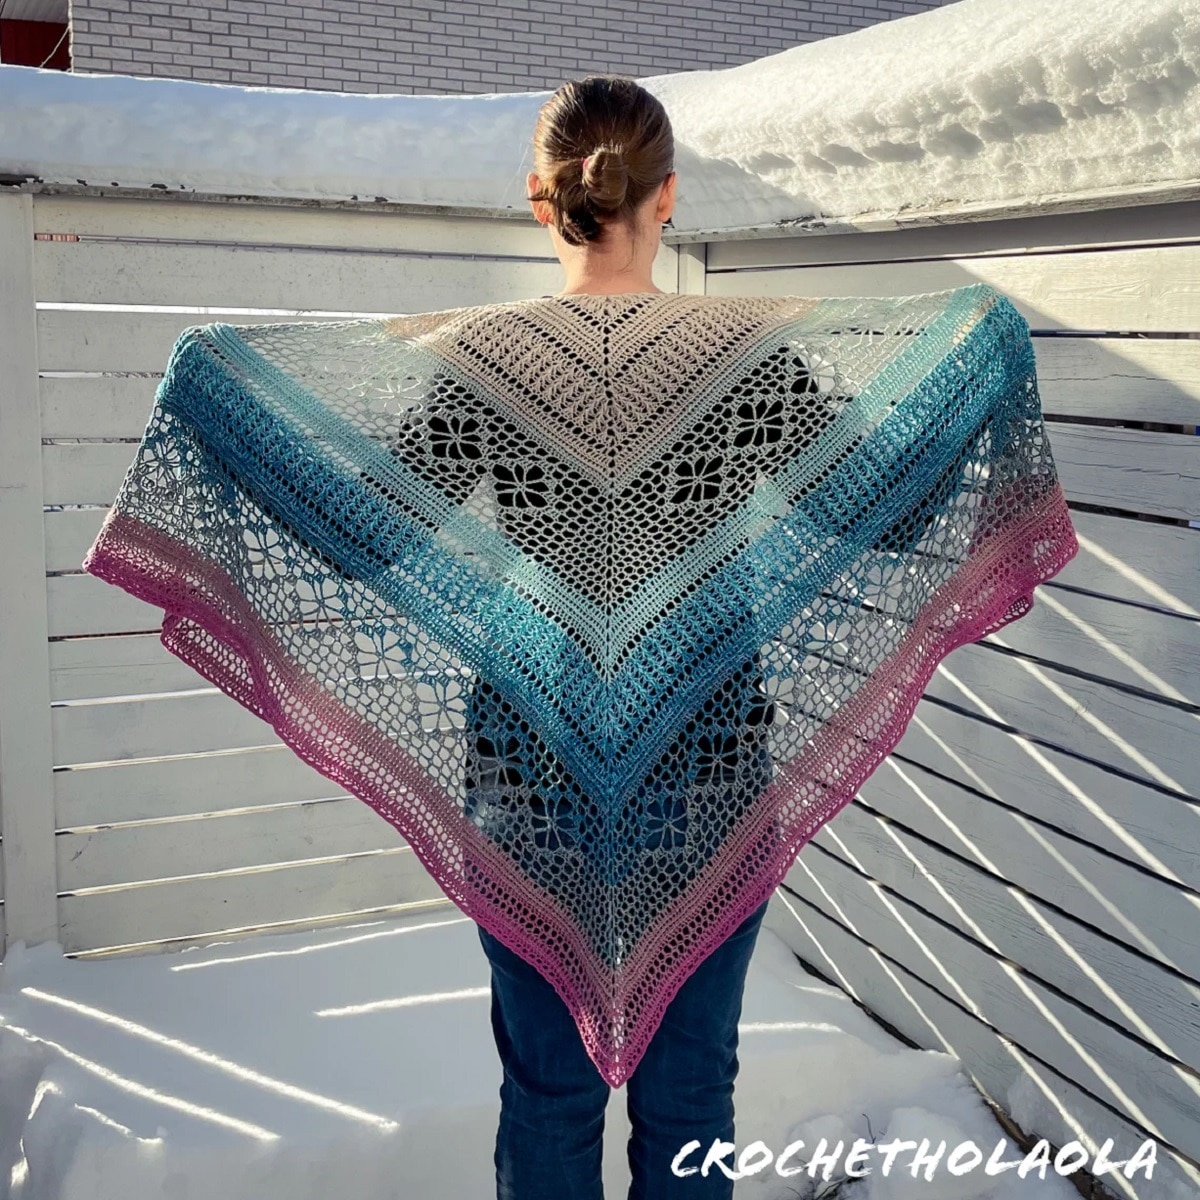 Brunette woman standing backwards with a pink, cream, and blue crochet shawl with diagonal stripes for each color.